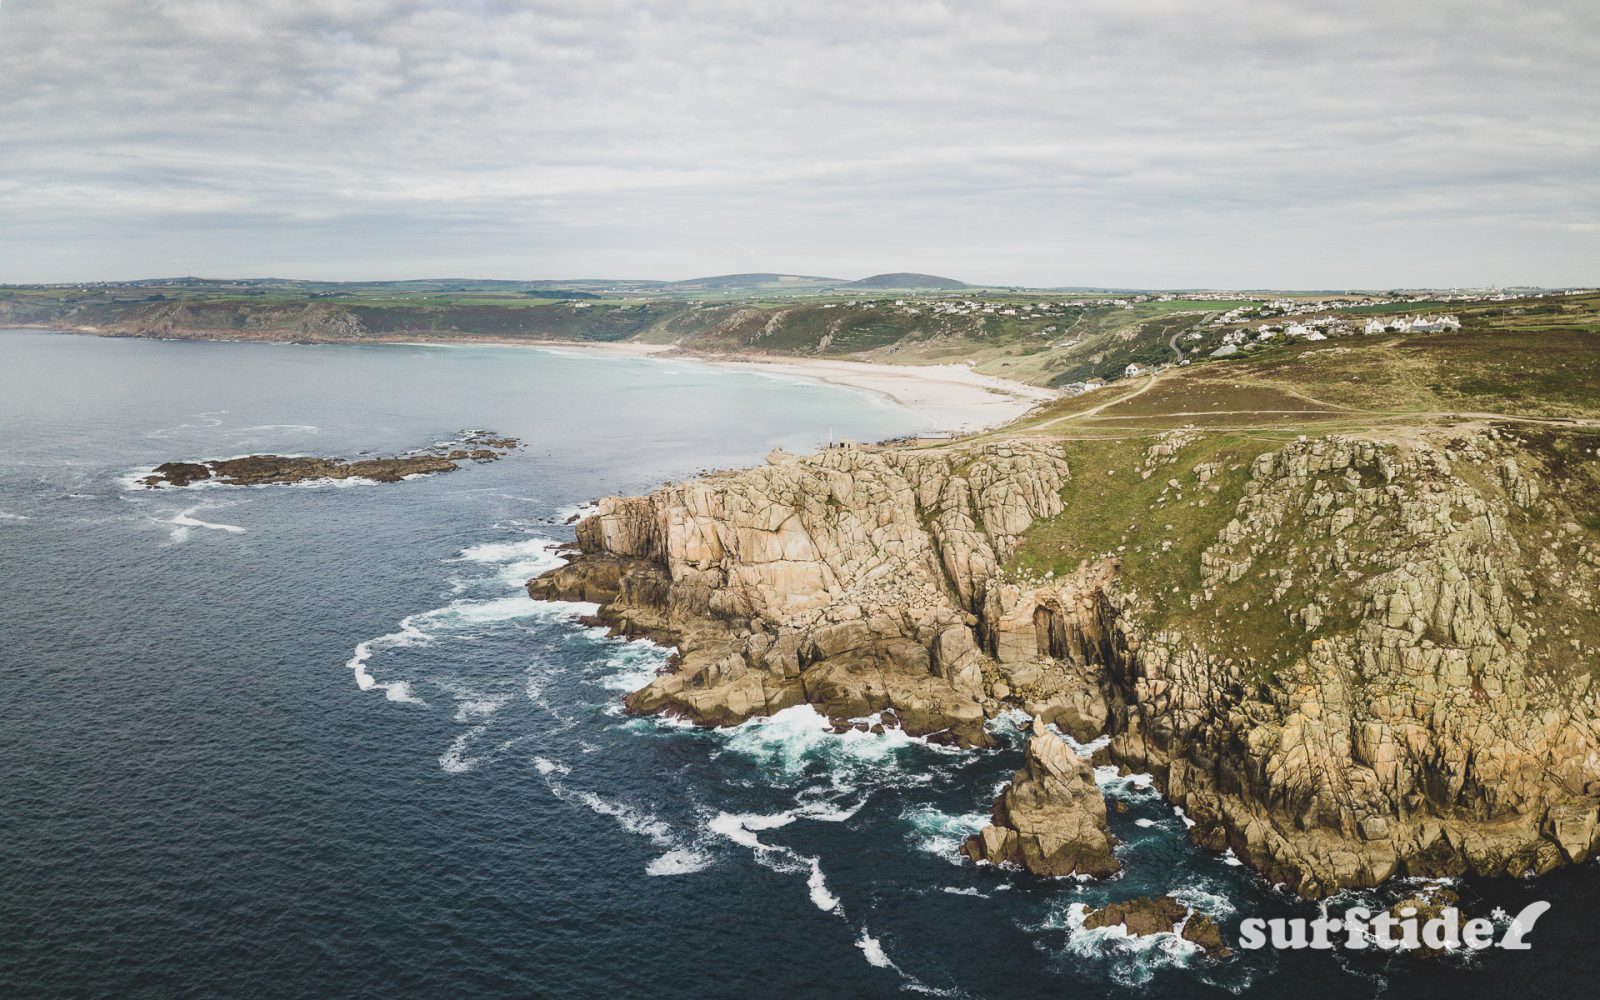 Aerial photo of the sea and rocky cliffs near Sennen Cove, Cornwall, England